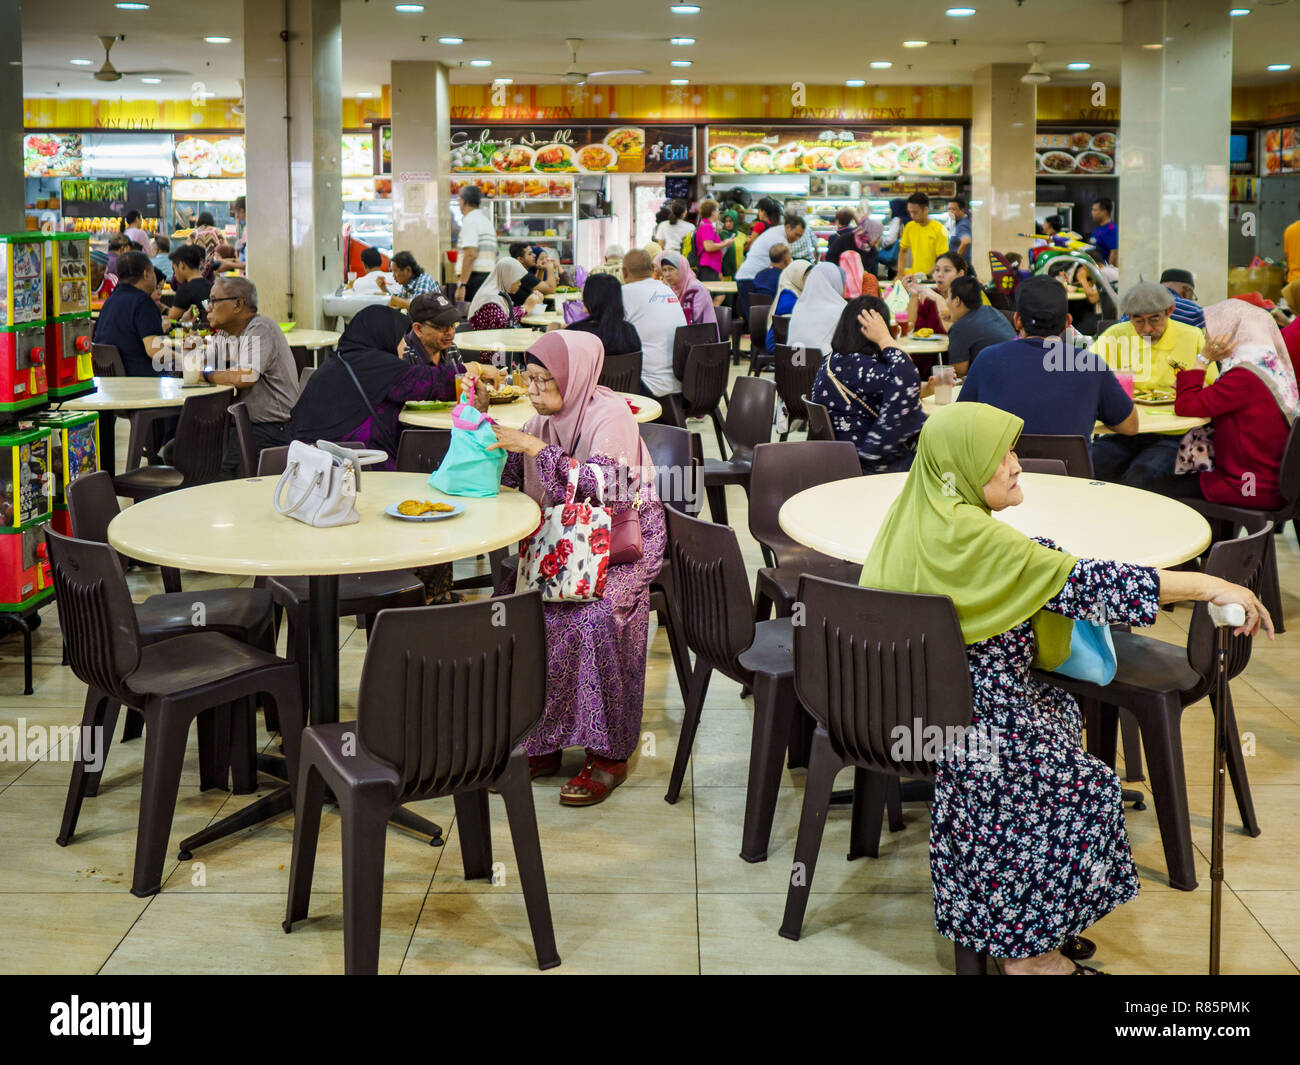 Singapore, Singapore. 13th Dec, 2018. The ''hawker stalls'' in the Joo Chiat complex in the Geylang neighborhood. Joo Chiat is a multi-tower high rise residential estate. Hawker stalls used to be street food stalls, but the government of Singapore has moved them into permanent food courts. There are hawker food stalls and retail businesses on the ground floor and residences on the upper levels. The Geylang area of Singapore, between the Central Business District and Changi Airport, was originally coconut plantations and Malay villages. During Singapore's boom the coconut plantations and Stock Photo